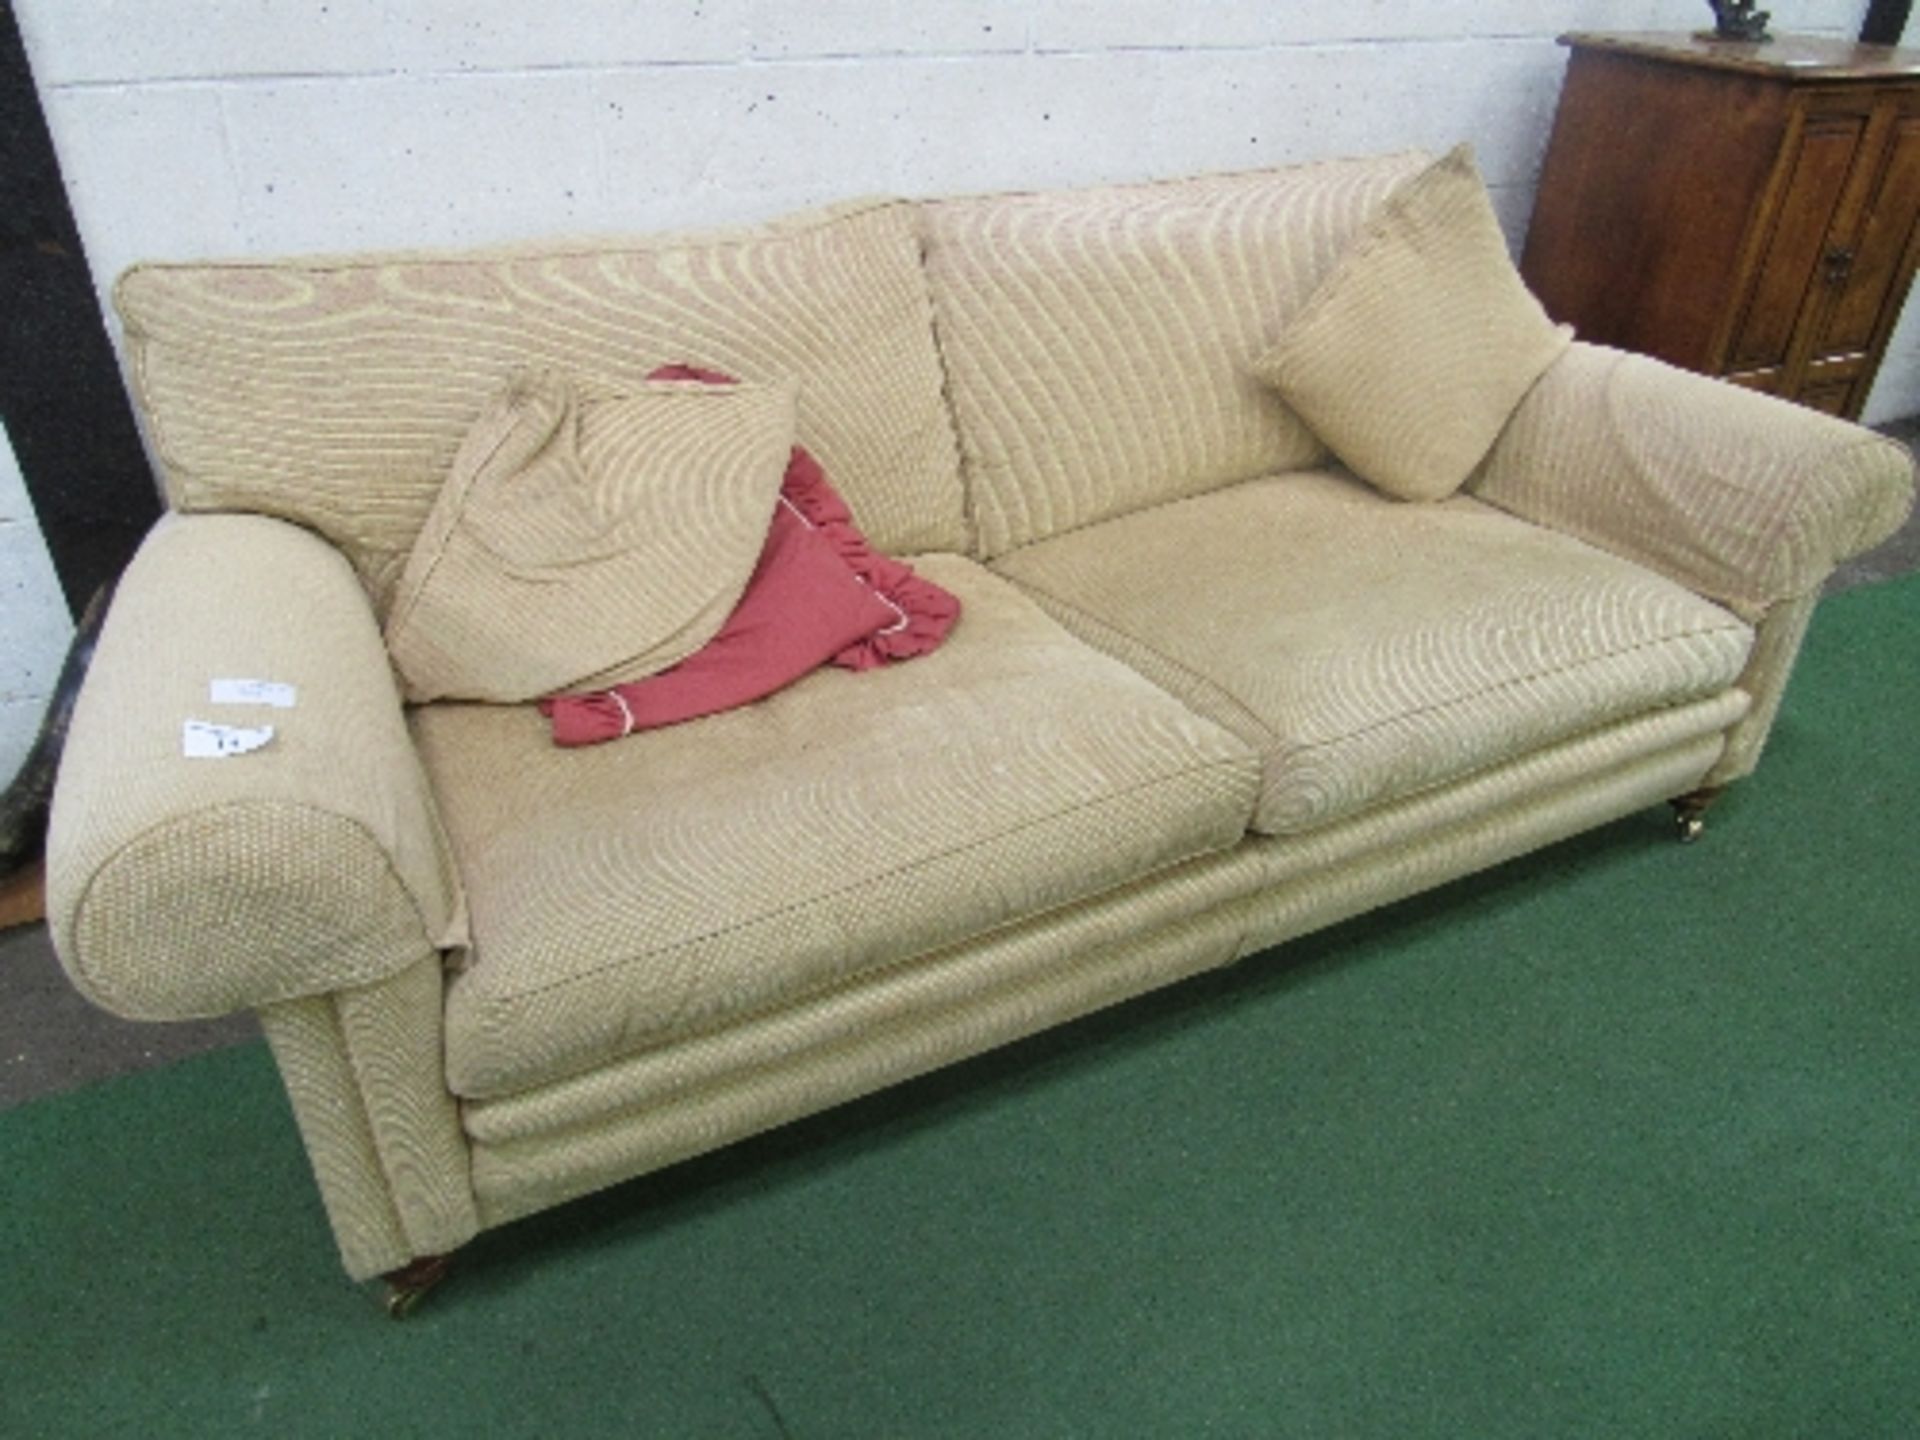 Large corded 3 seat sofa, approx 202cms length. Estimate £125-150